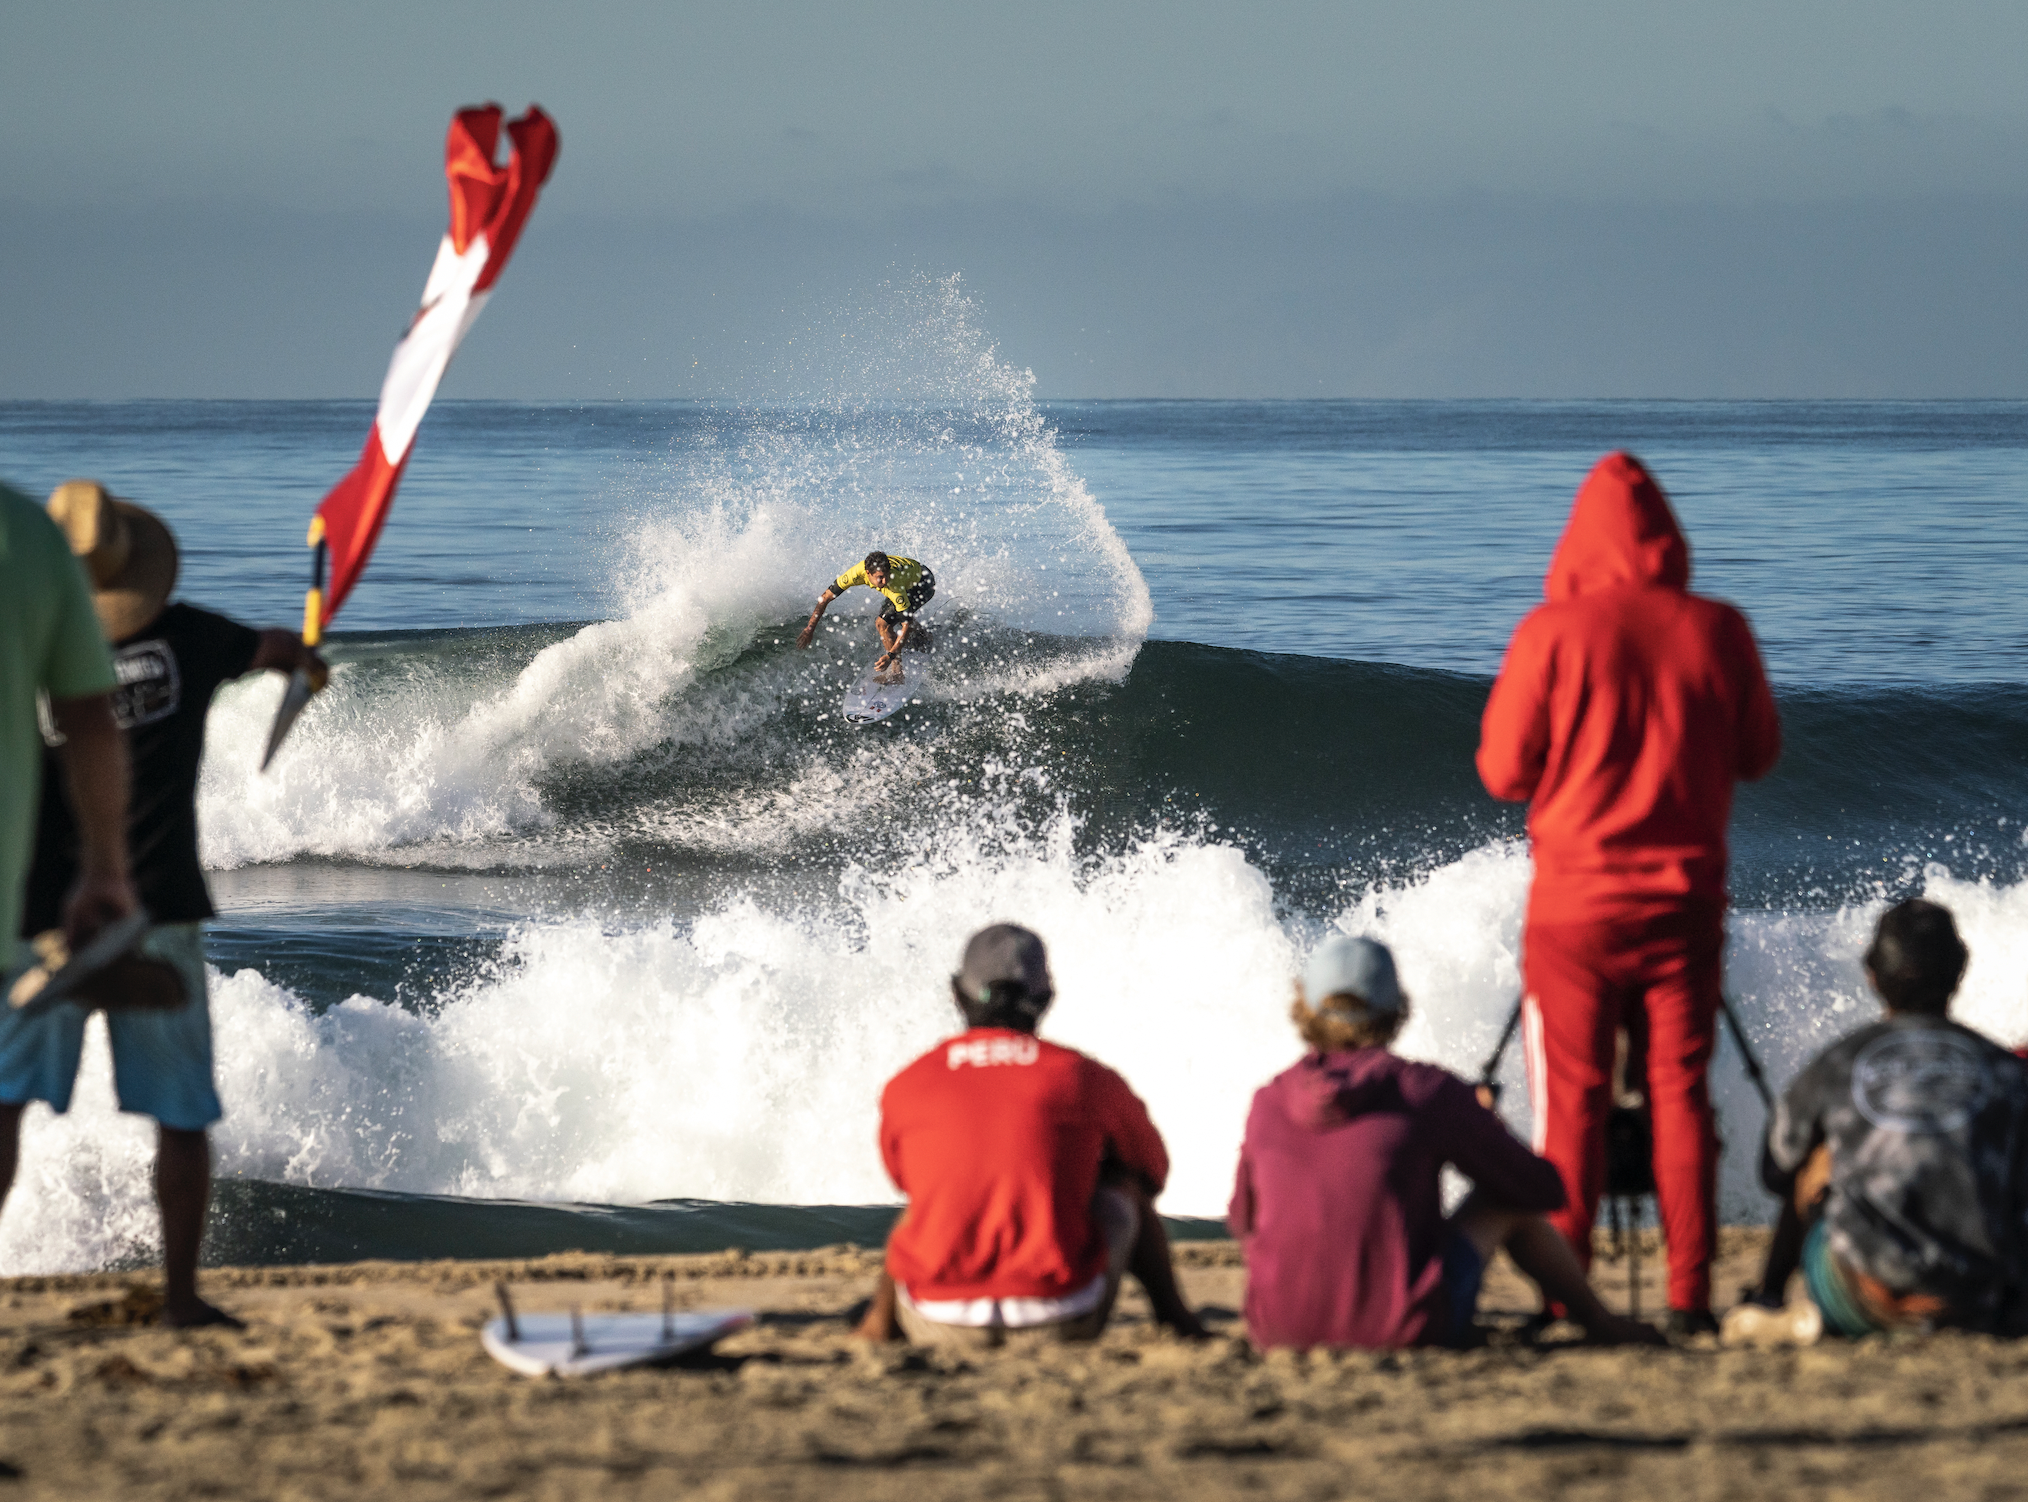 Peru's Rosas continues excellence at ISA World Surfing Games